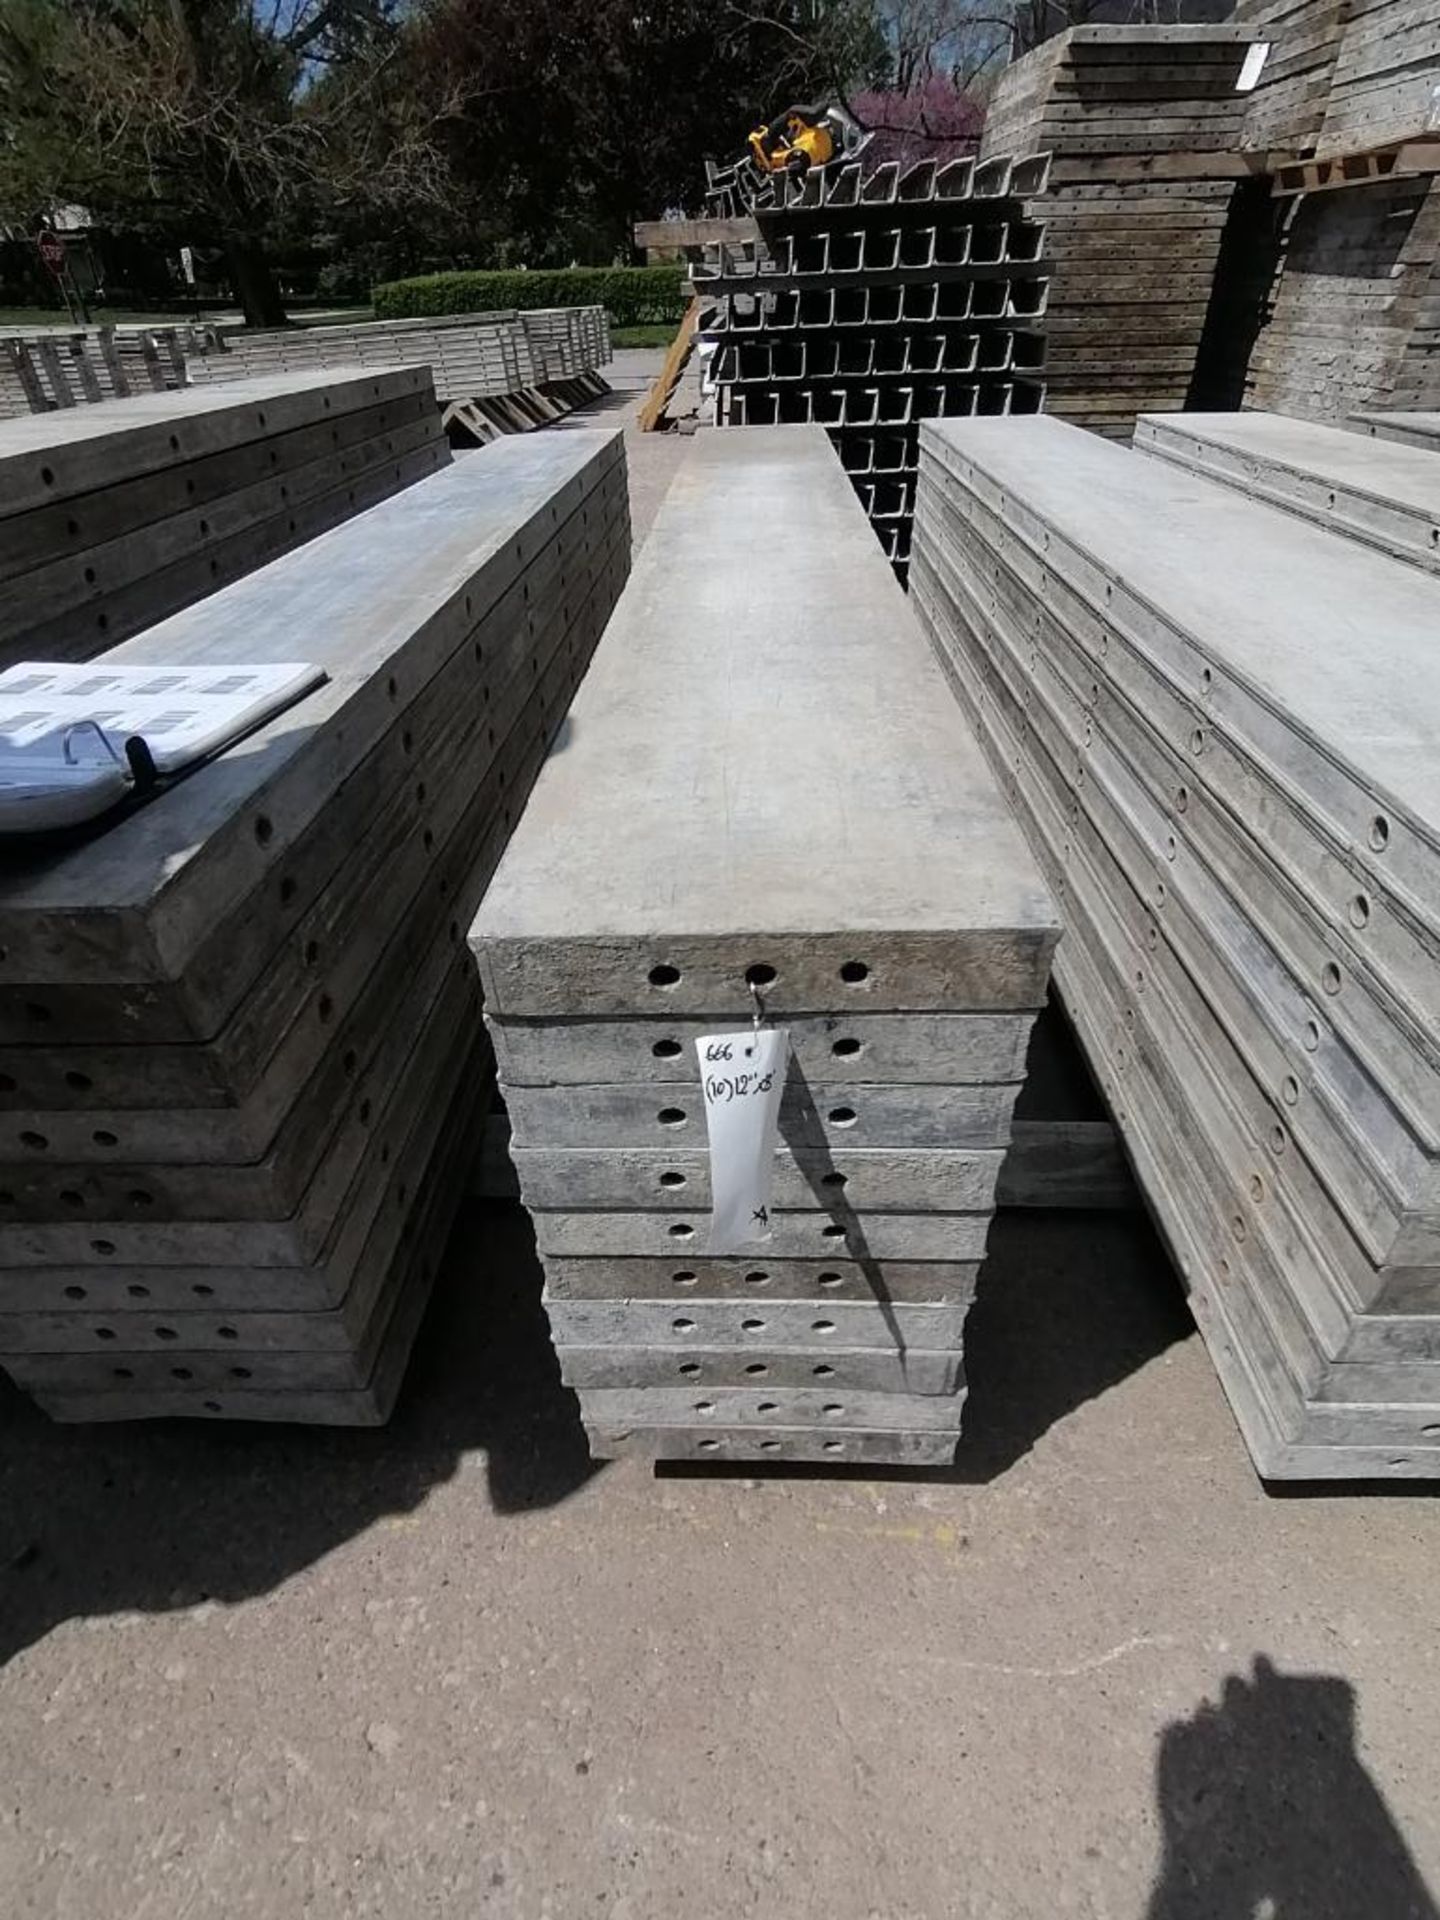 (10) 12" x 8' Wall-Ties Smooth Aluminum Concrete Forms 6-12 Hole Pattern. Located in Mt. Pleasant,